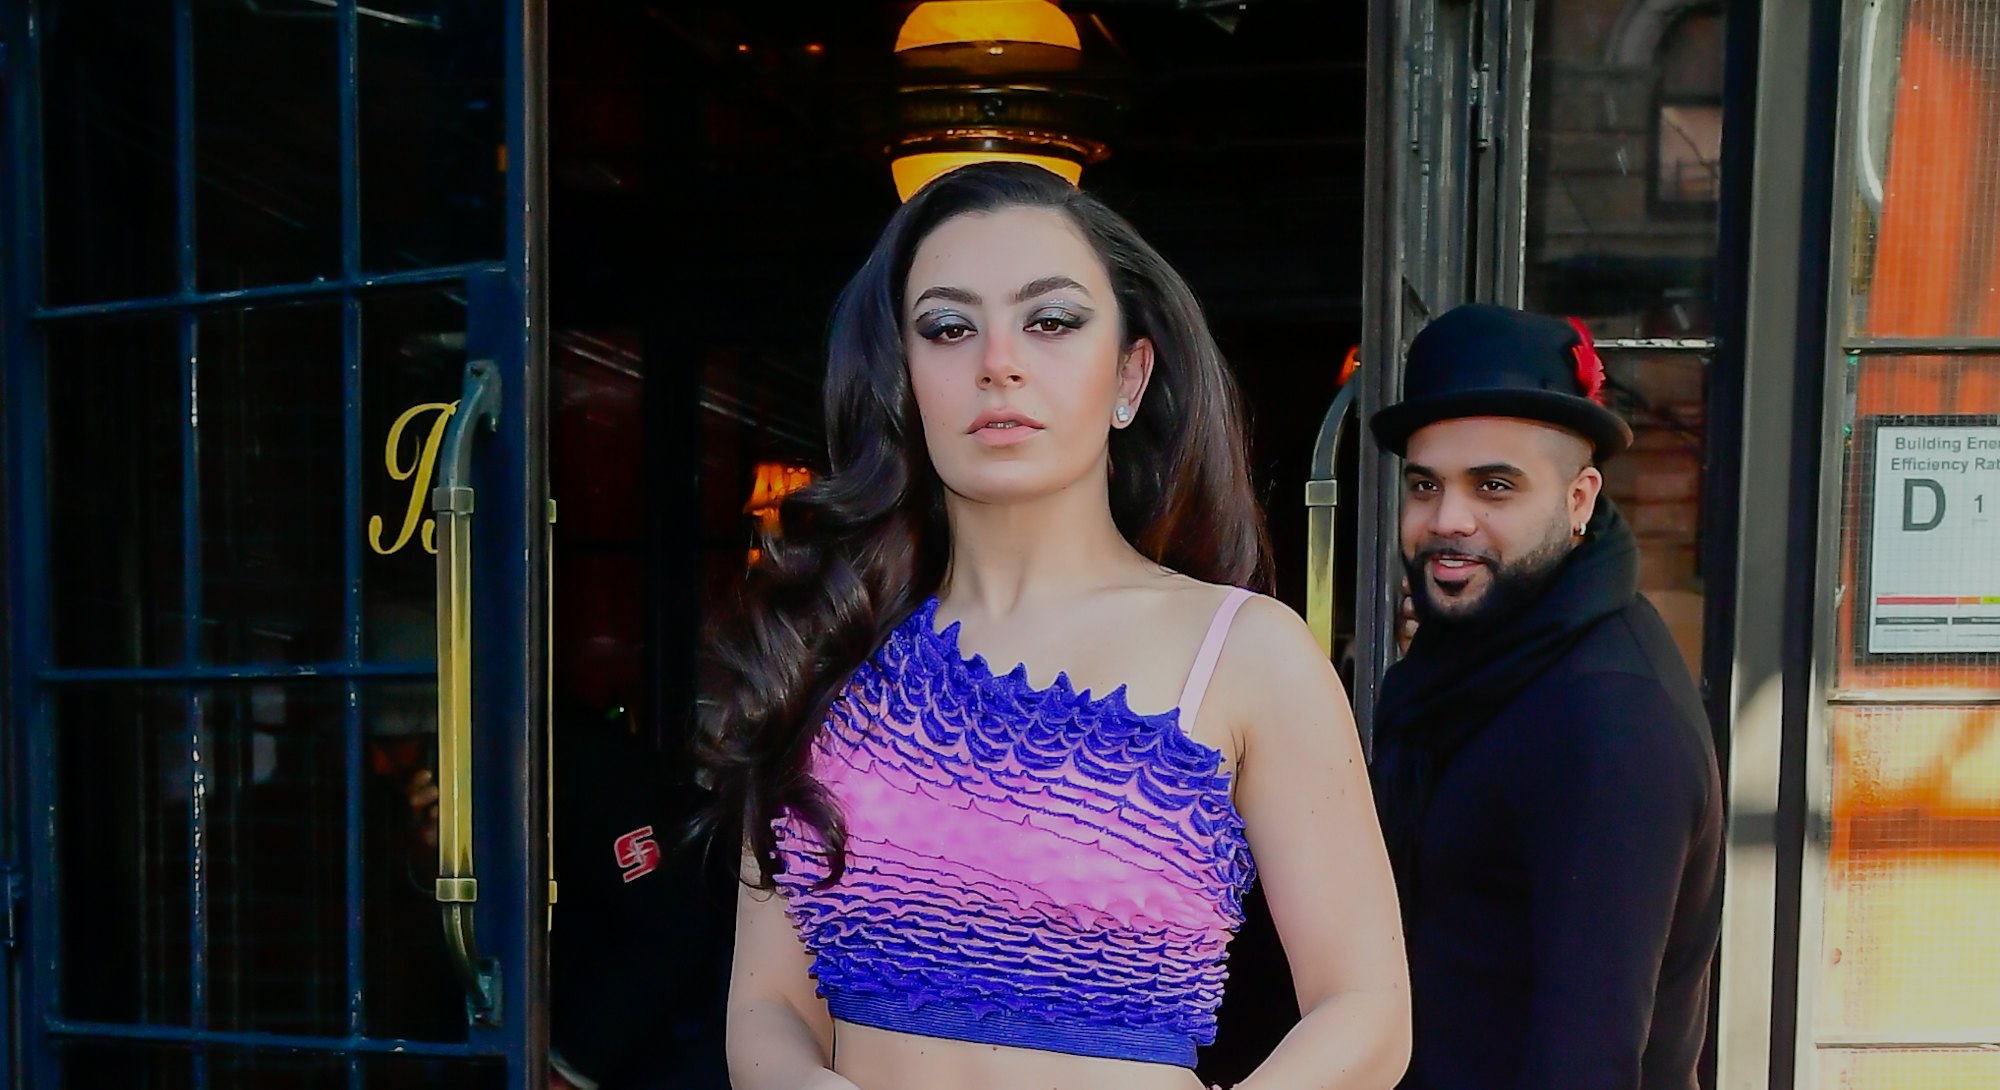 NEW YORK, NY - MARCH 04:  Singer Charli XCX is seen in SoHo on March 4, 2022 in New York City.  (Pho...